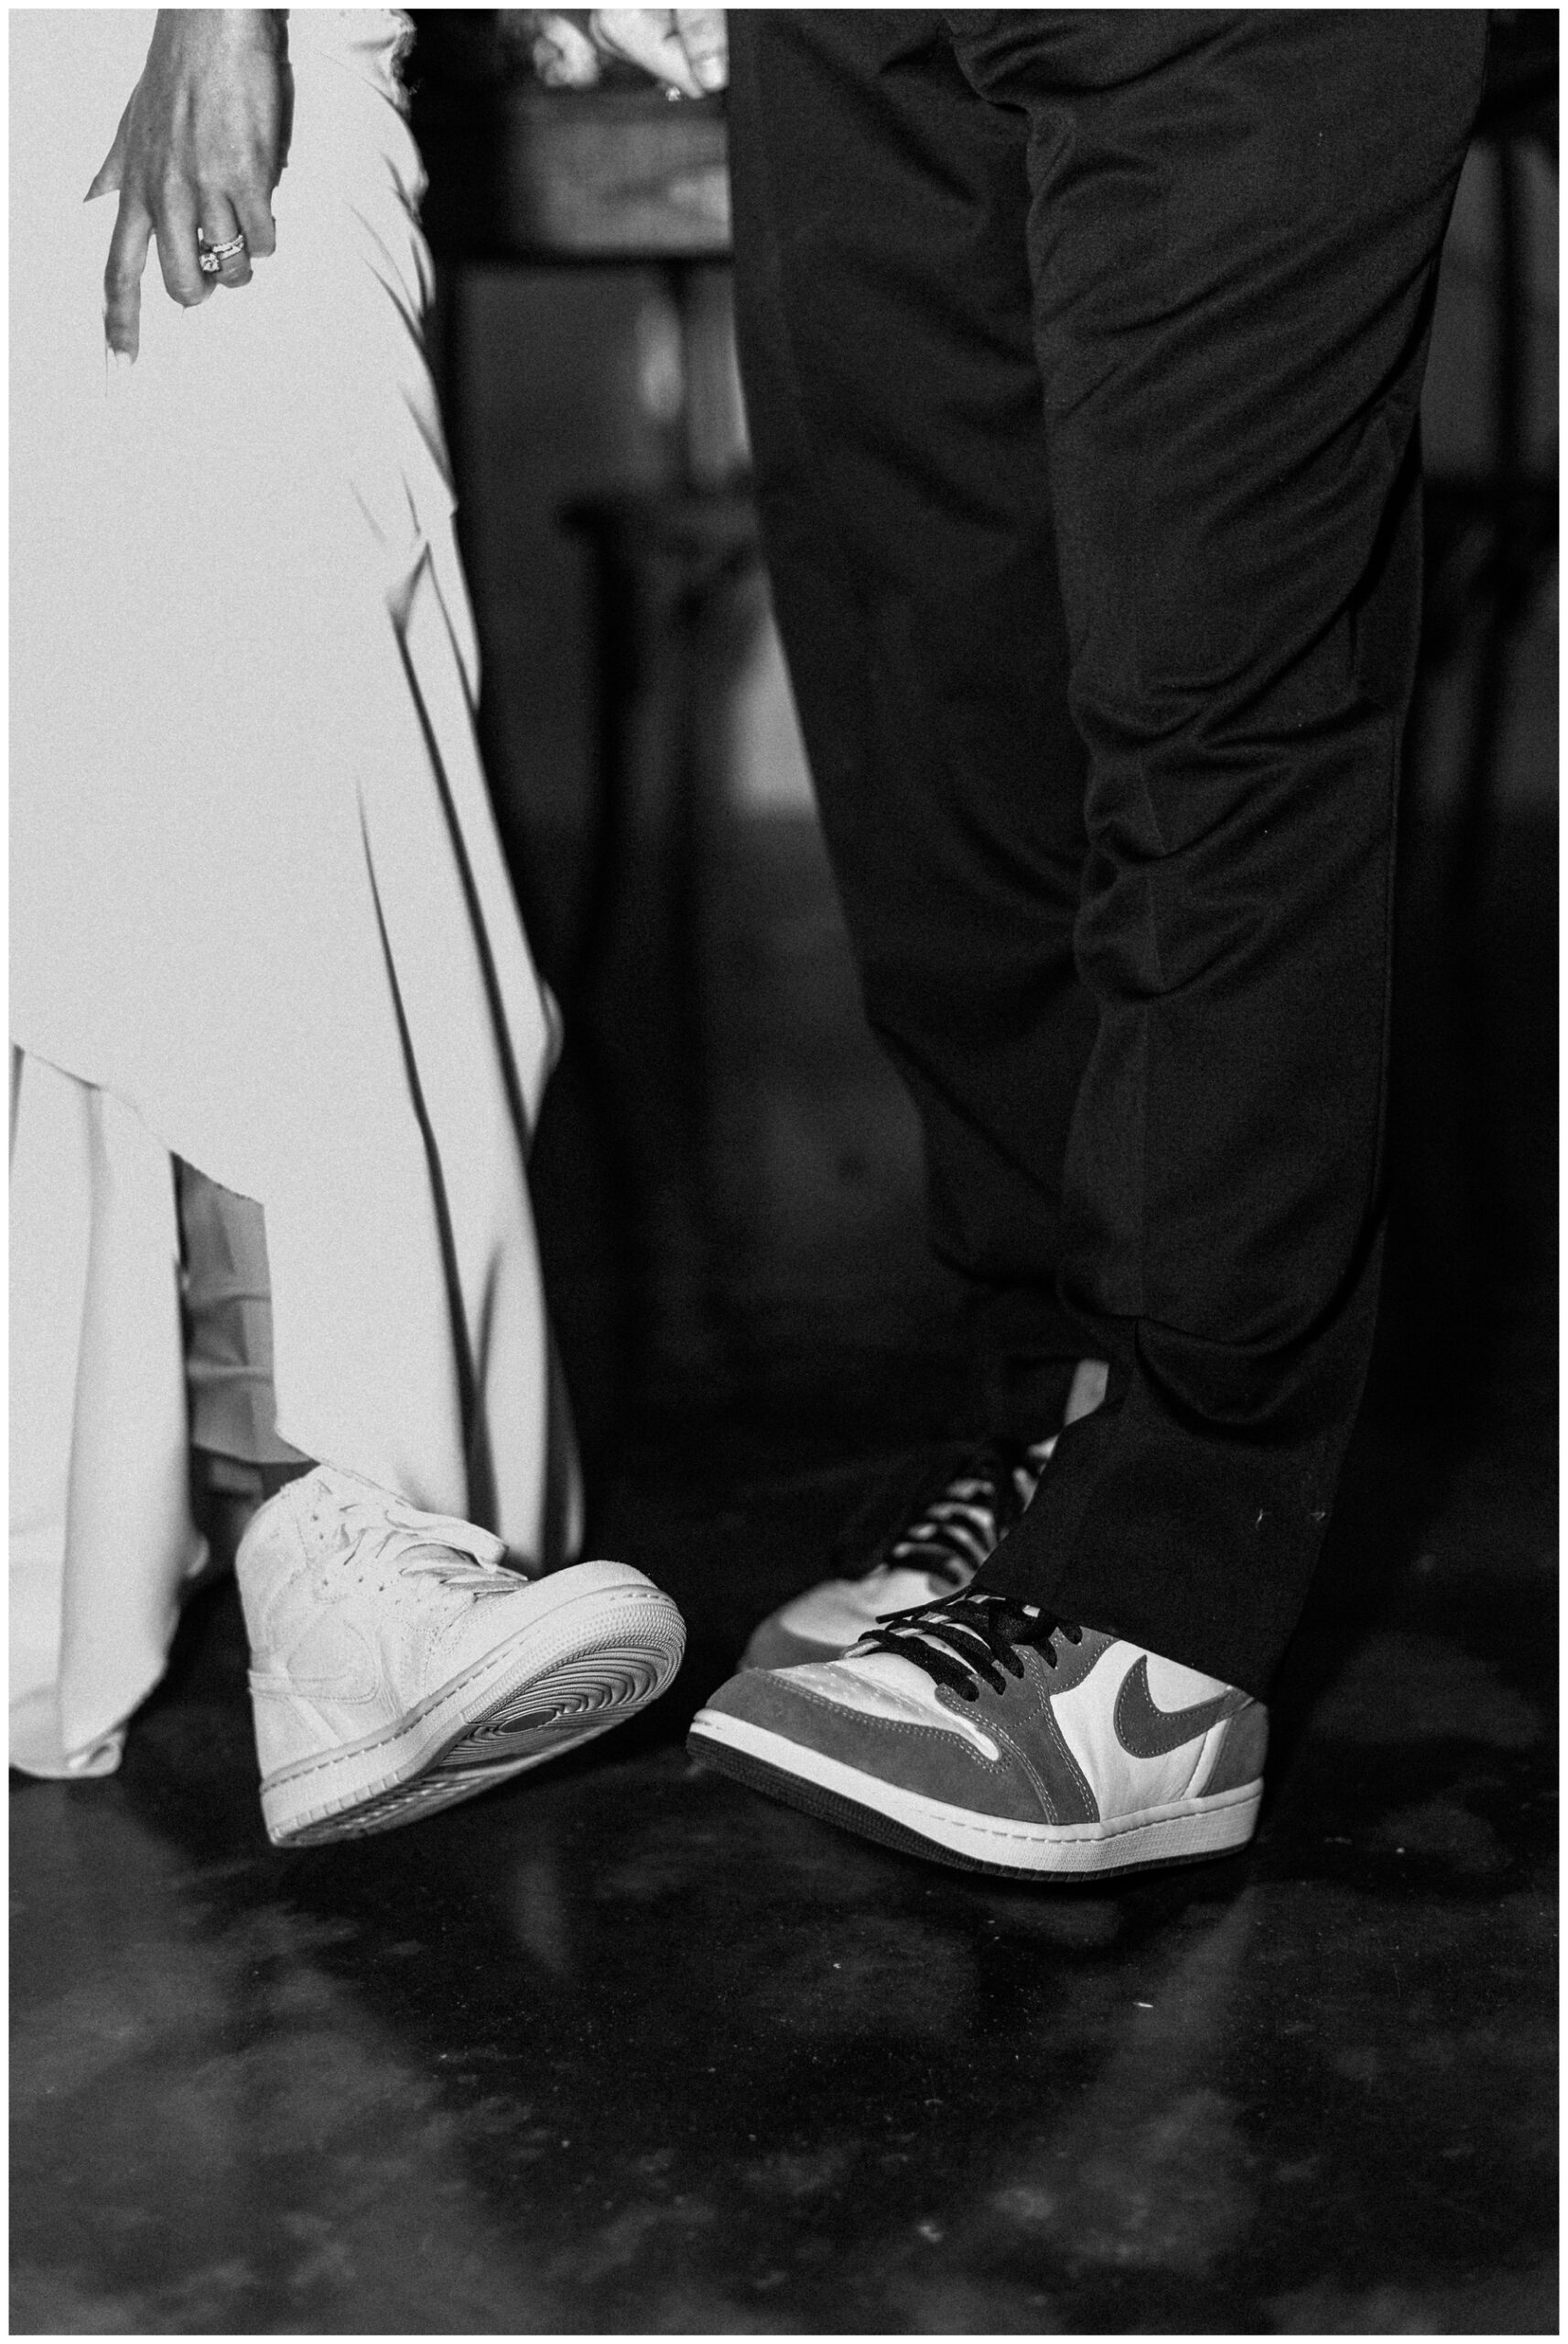 Bride and groom wearing matching Jordans at their wedding reception